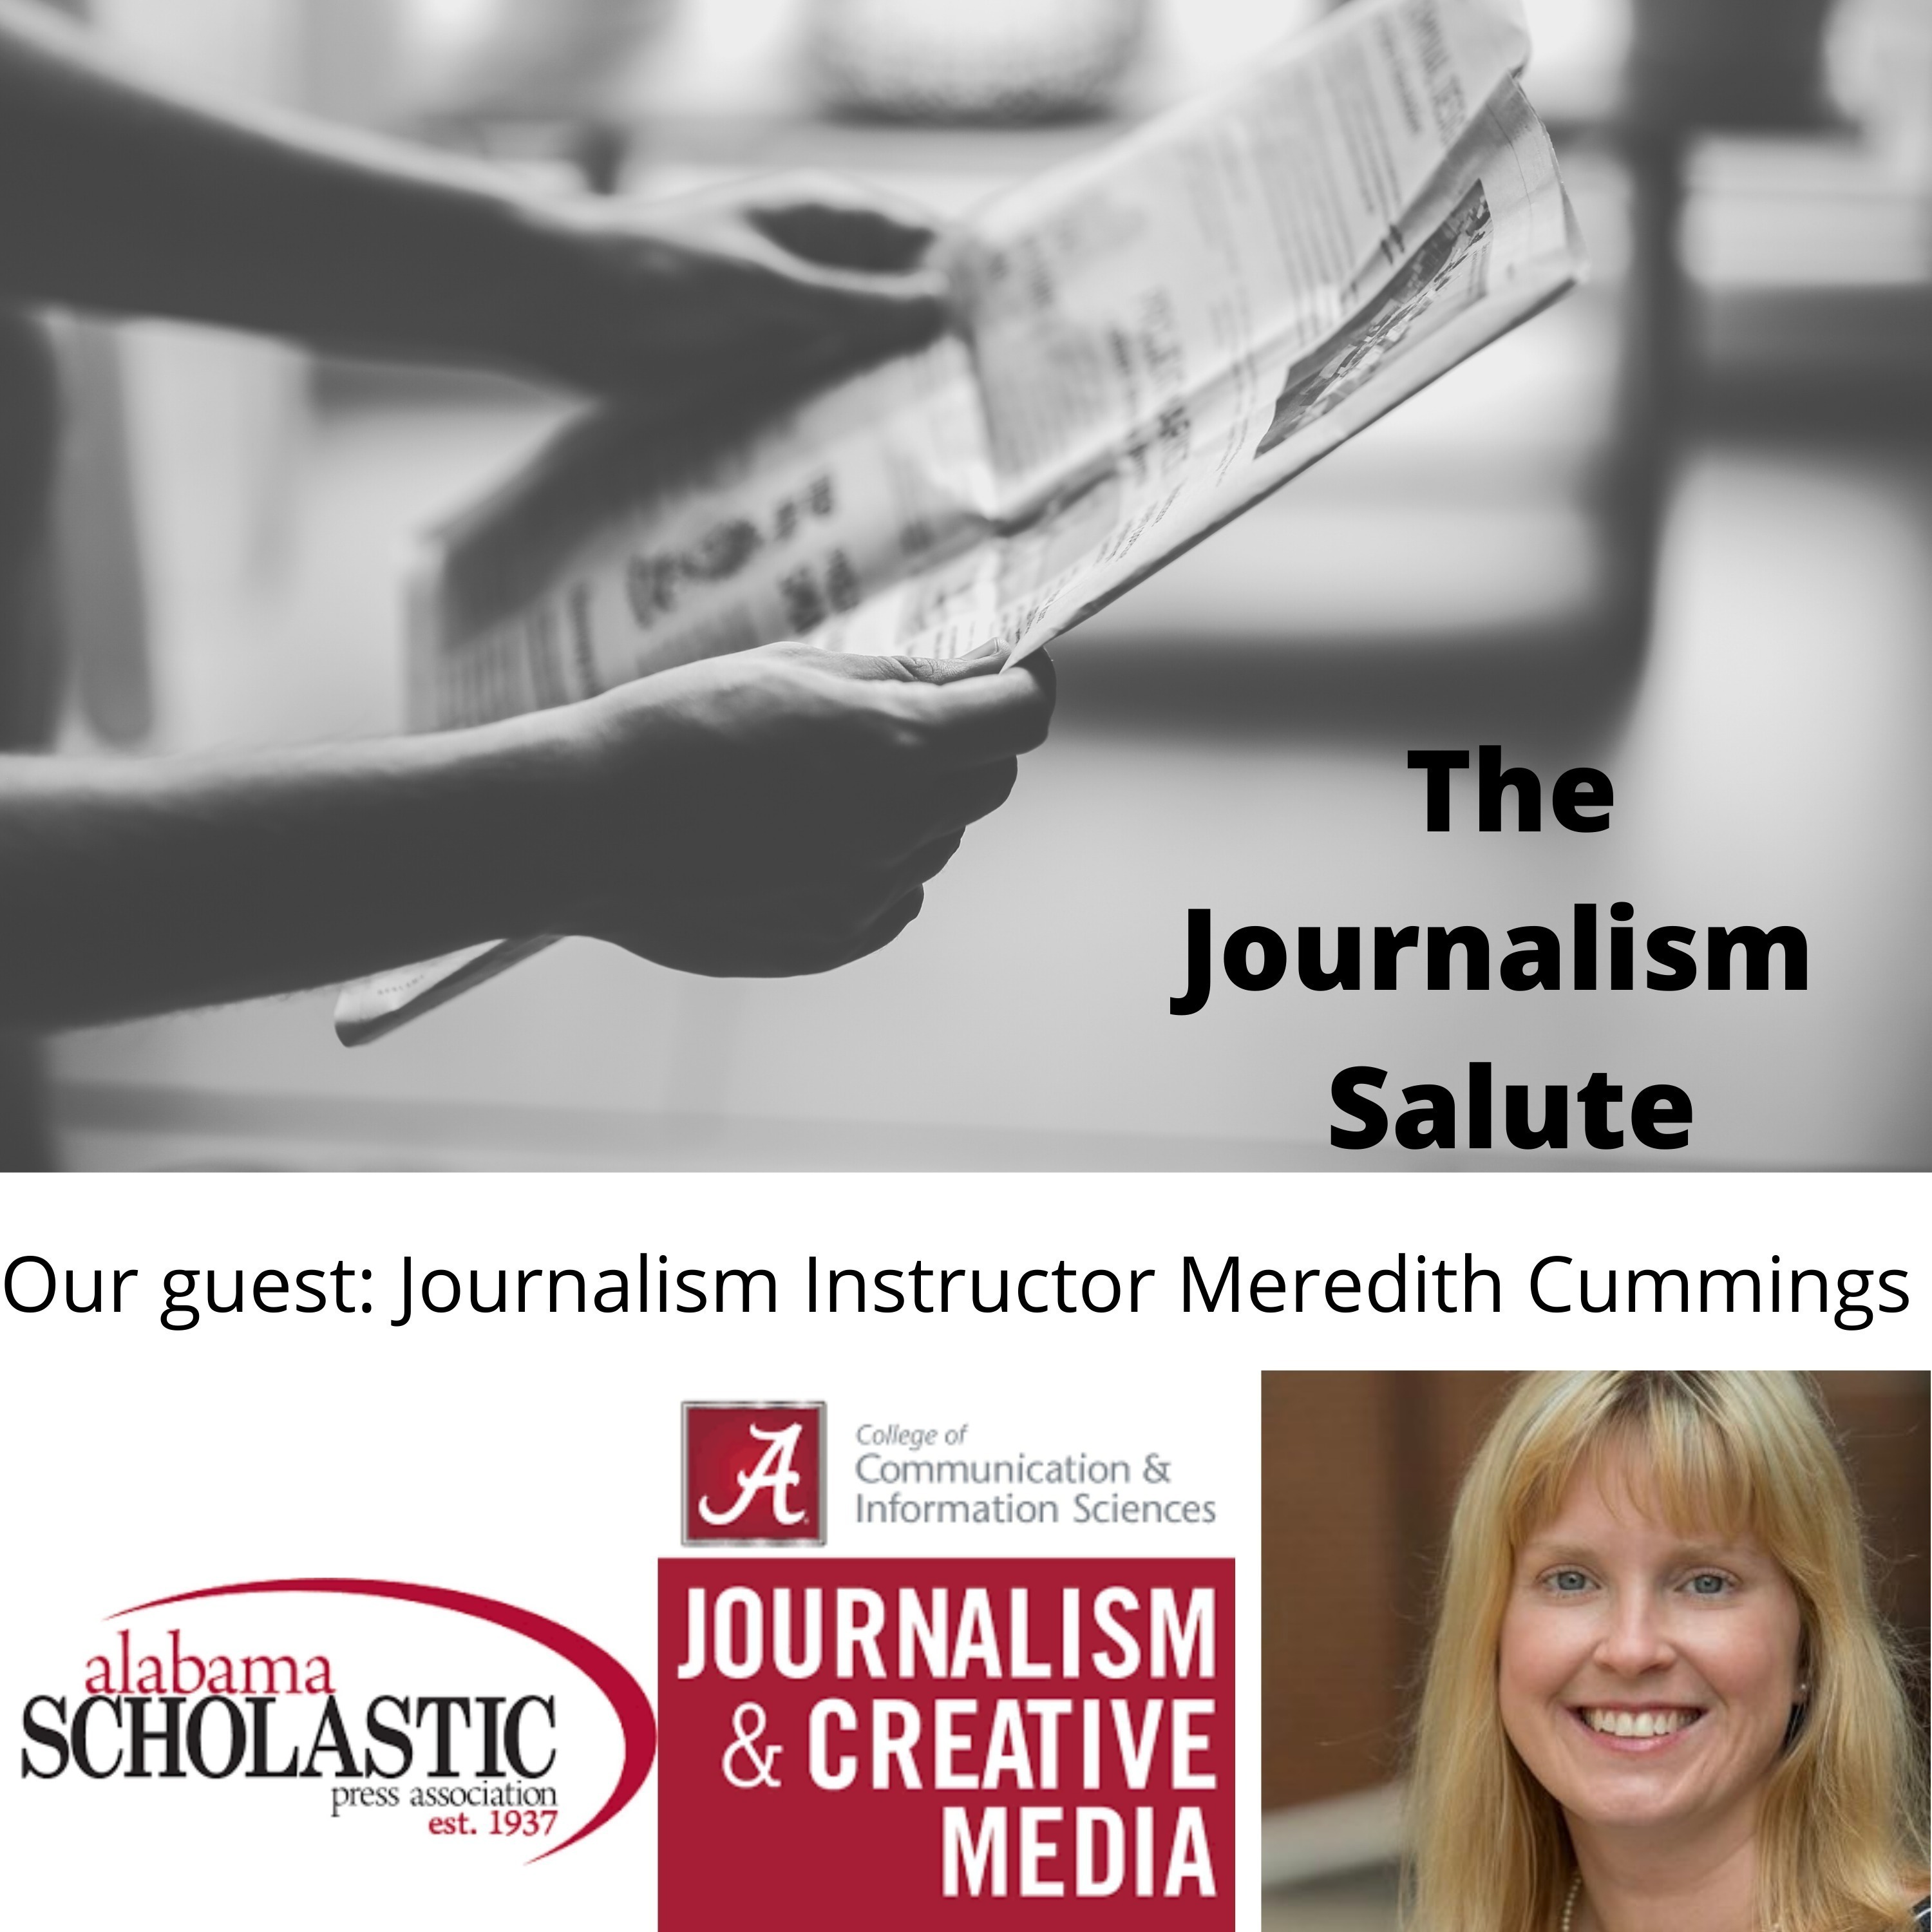 University of Alabama professor Meredith Cummings on teaching, touring newsrooms, and journalism for children of all ages